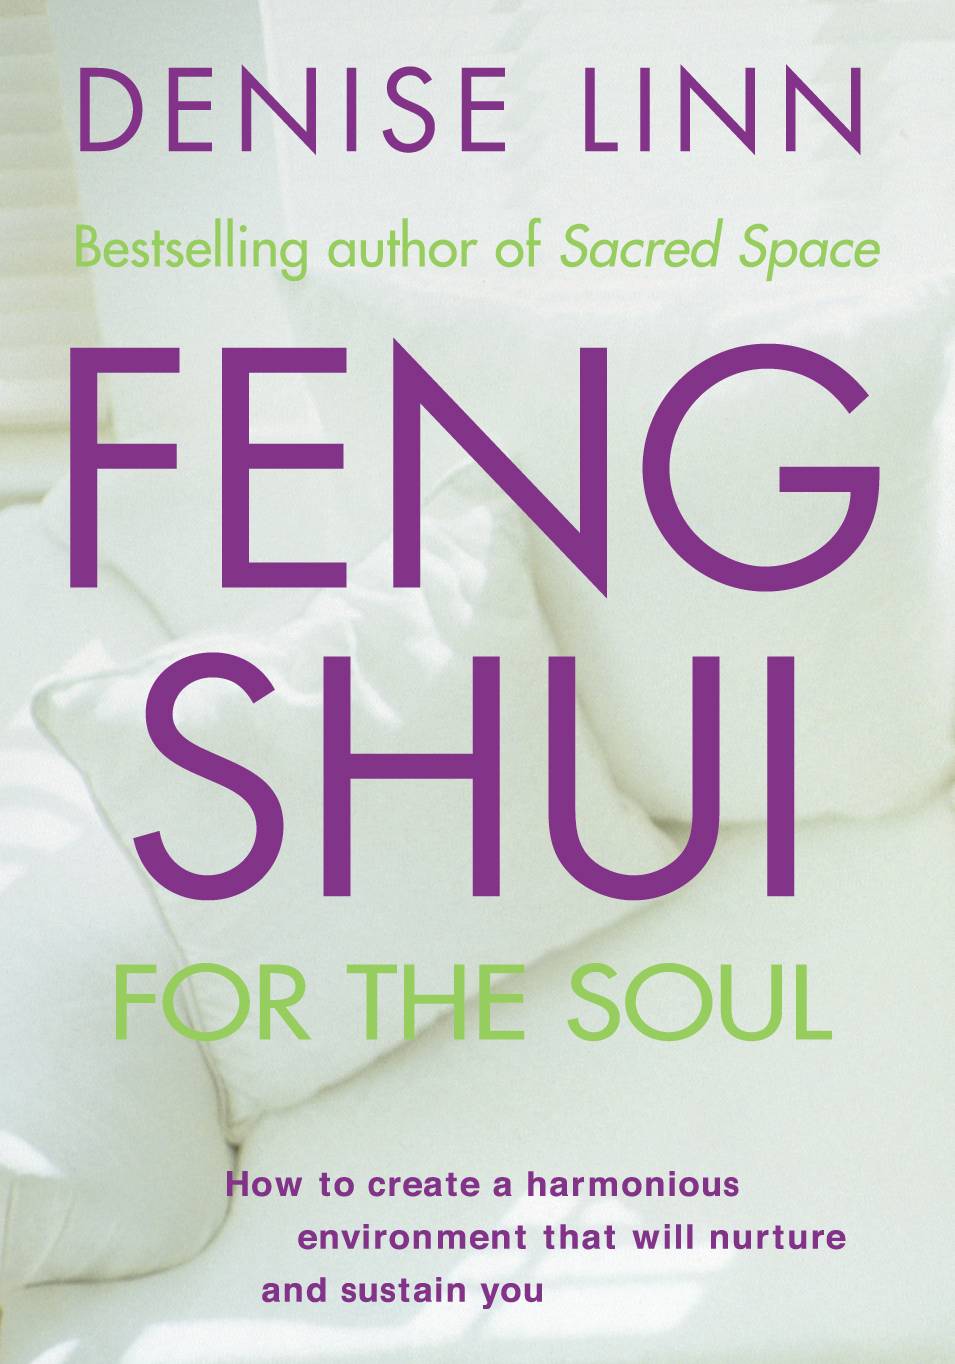 Feng shui for the soul - how to create a harmonious environment that will n